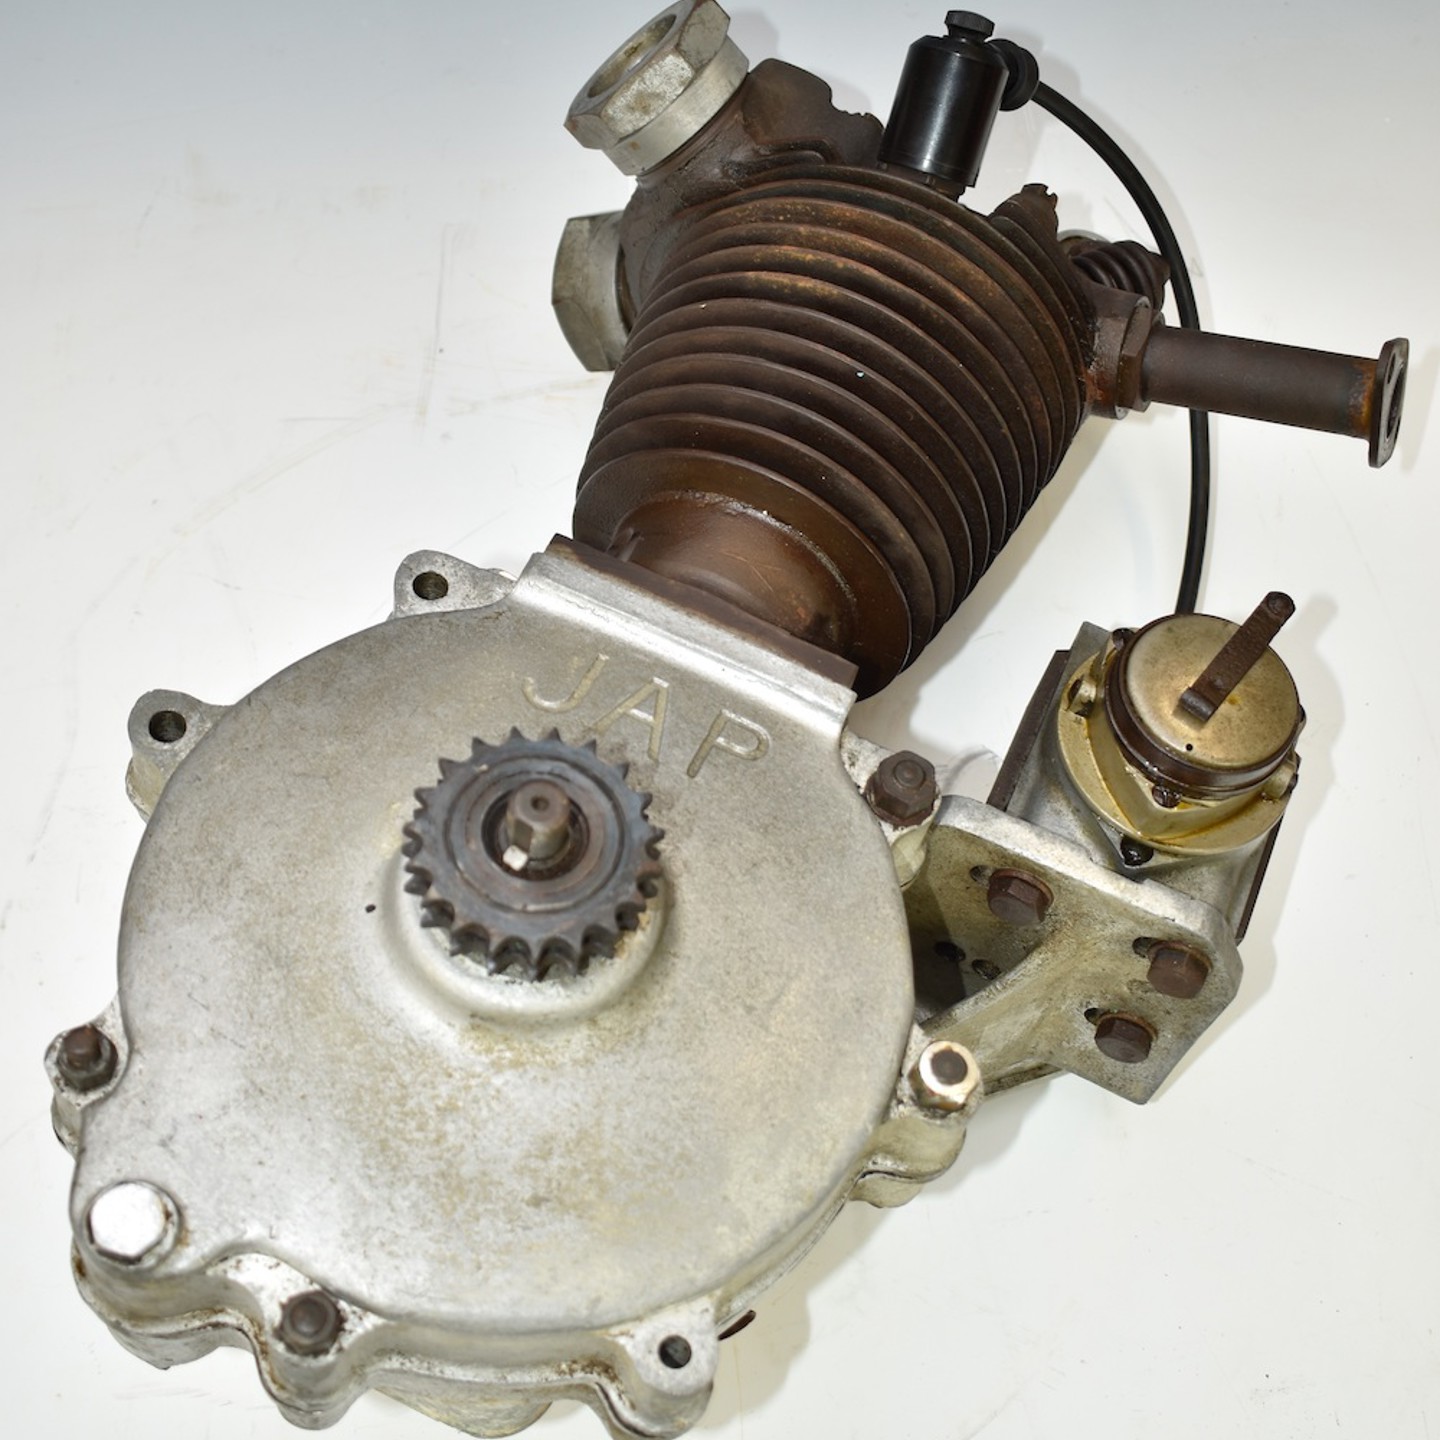 1931 JAP 350Cc Twin Port OHV Engine Fitted With A CK Square Magneto. Sold For £1,200